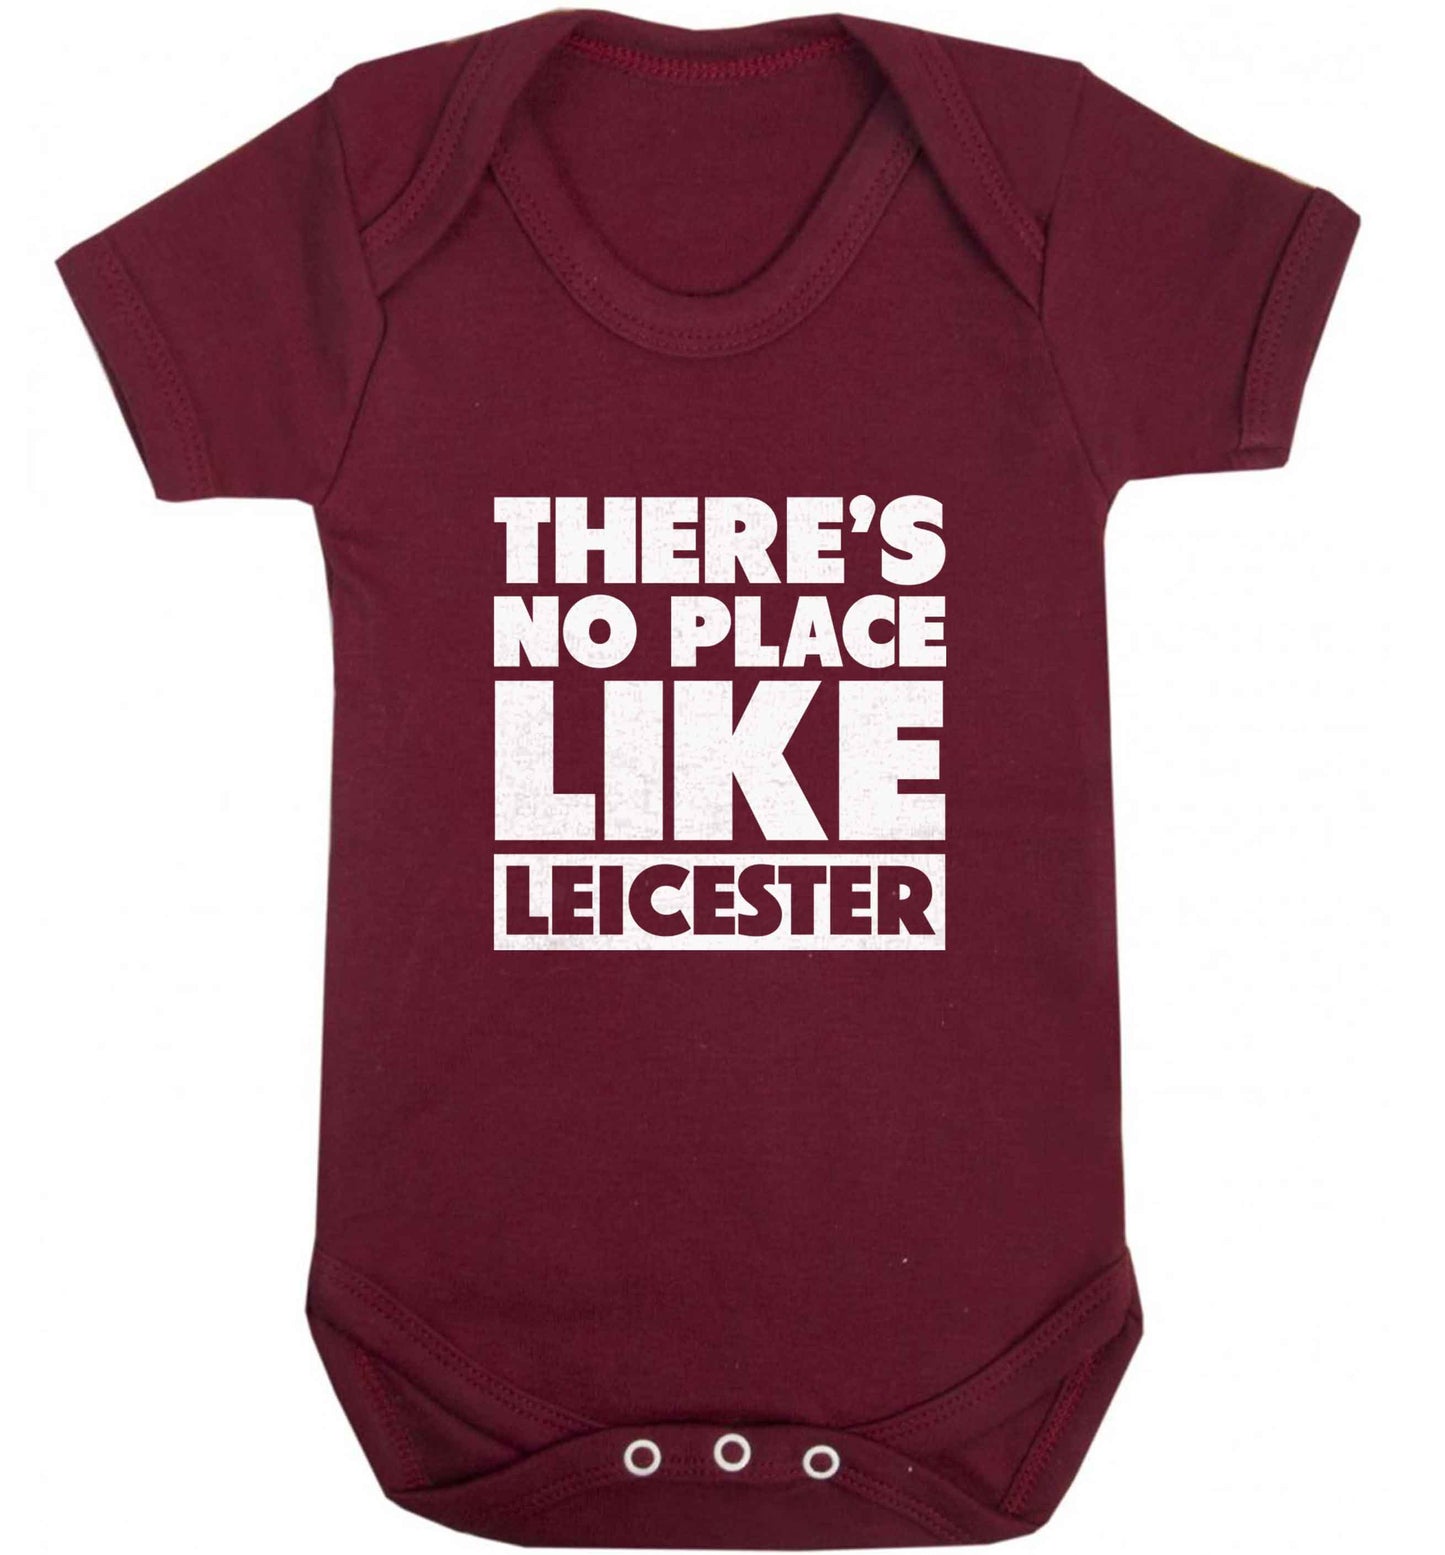 There's no place like Leicester baby vest maroon 18-24 months